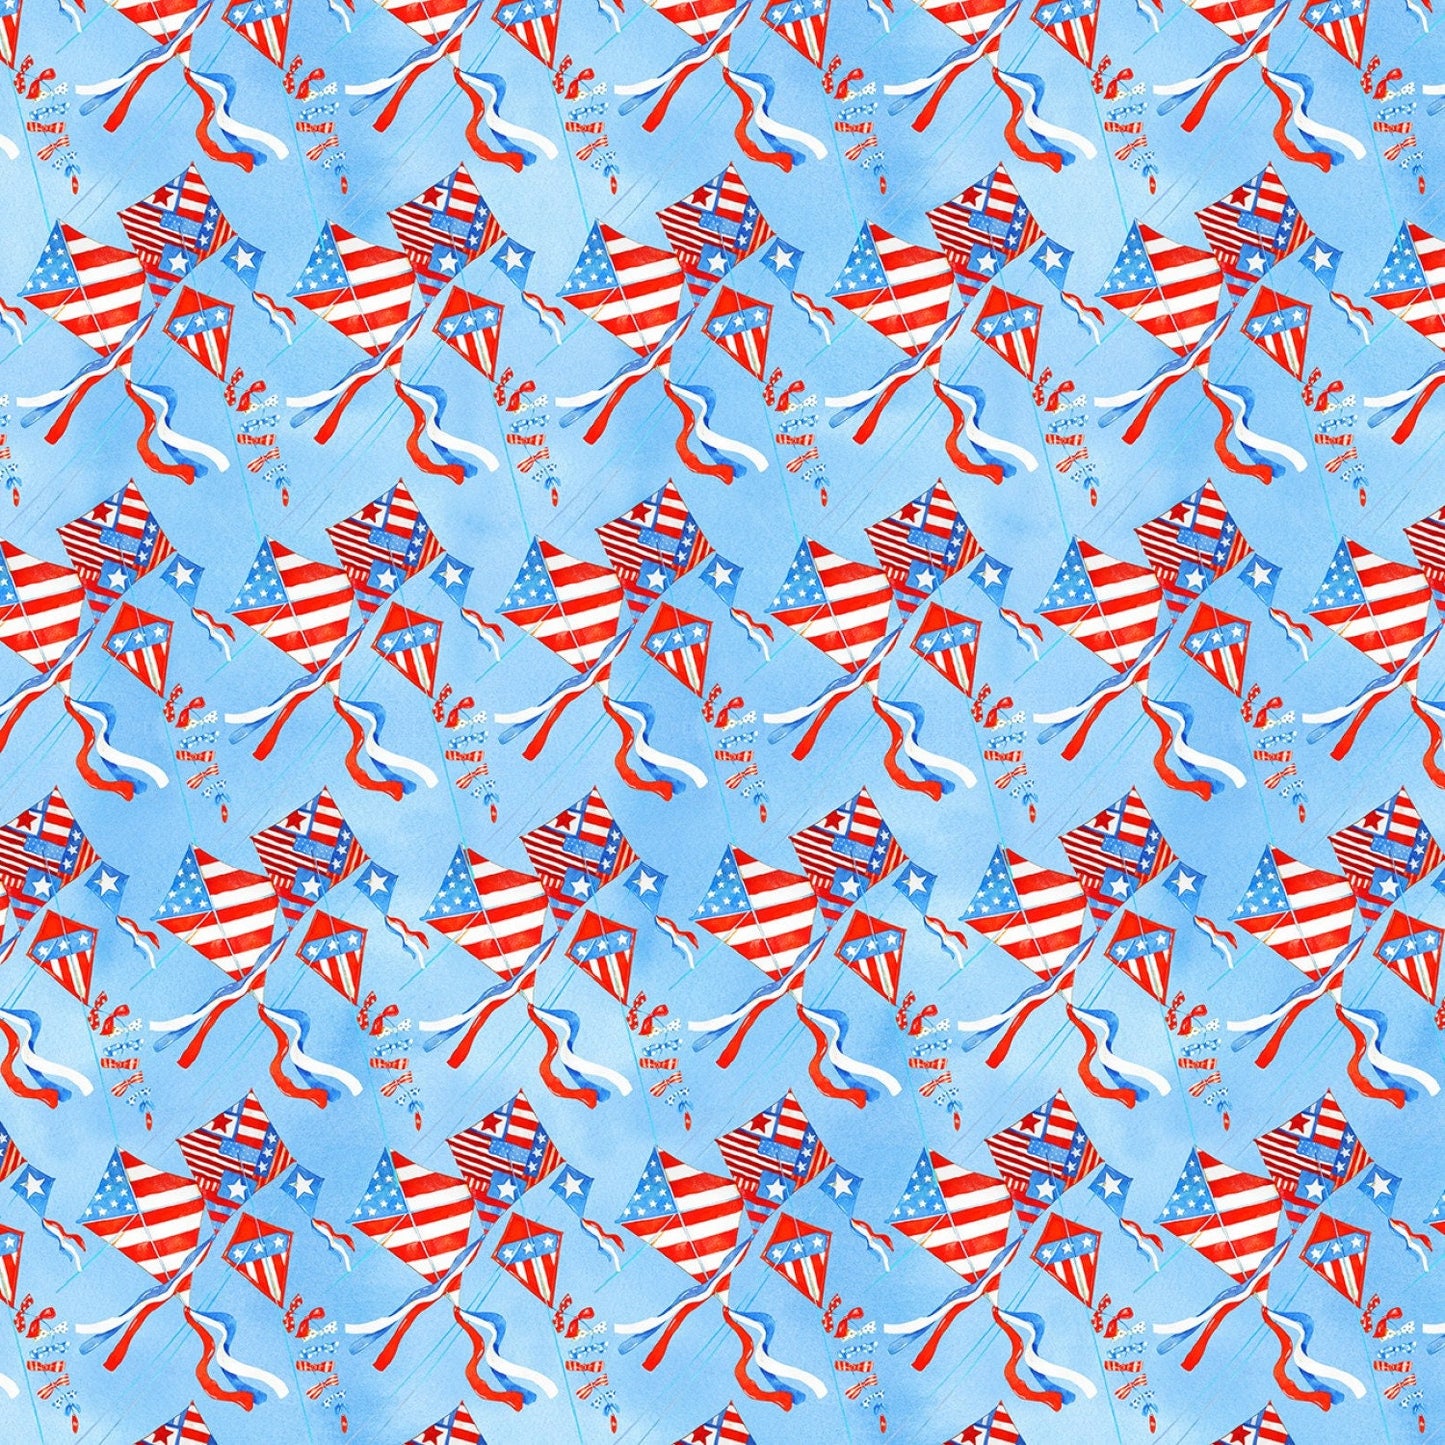 Star Spangled Summer by Andrea Tachiera Flying Kites Blue 9035-11 Cotton Woven Fabric